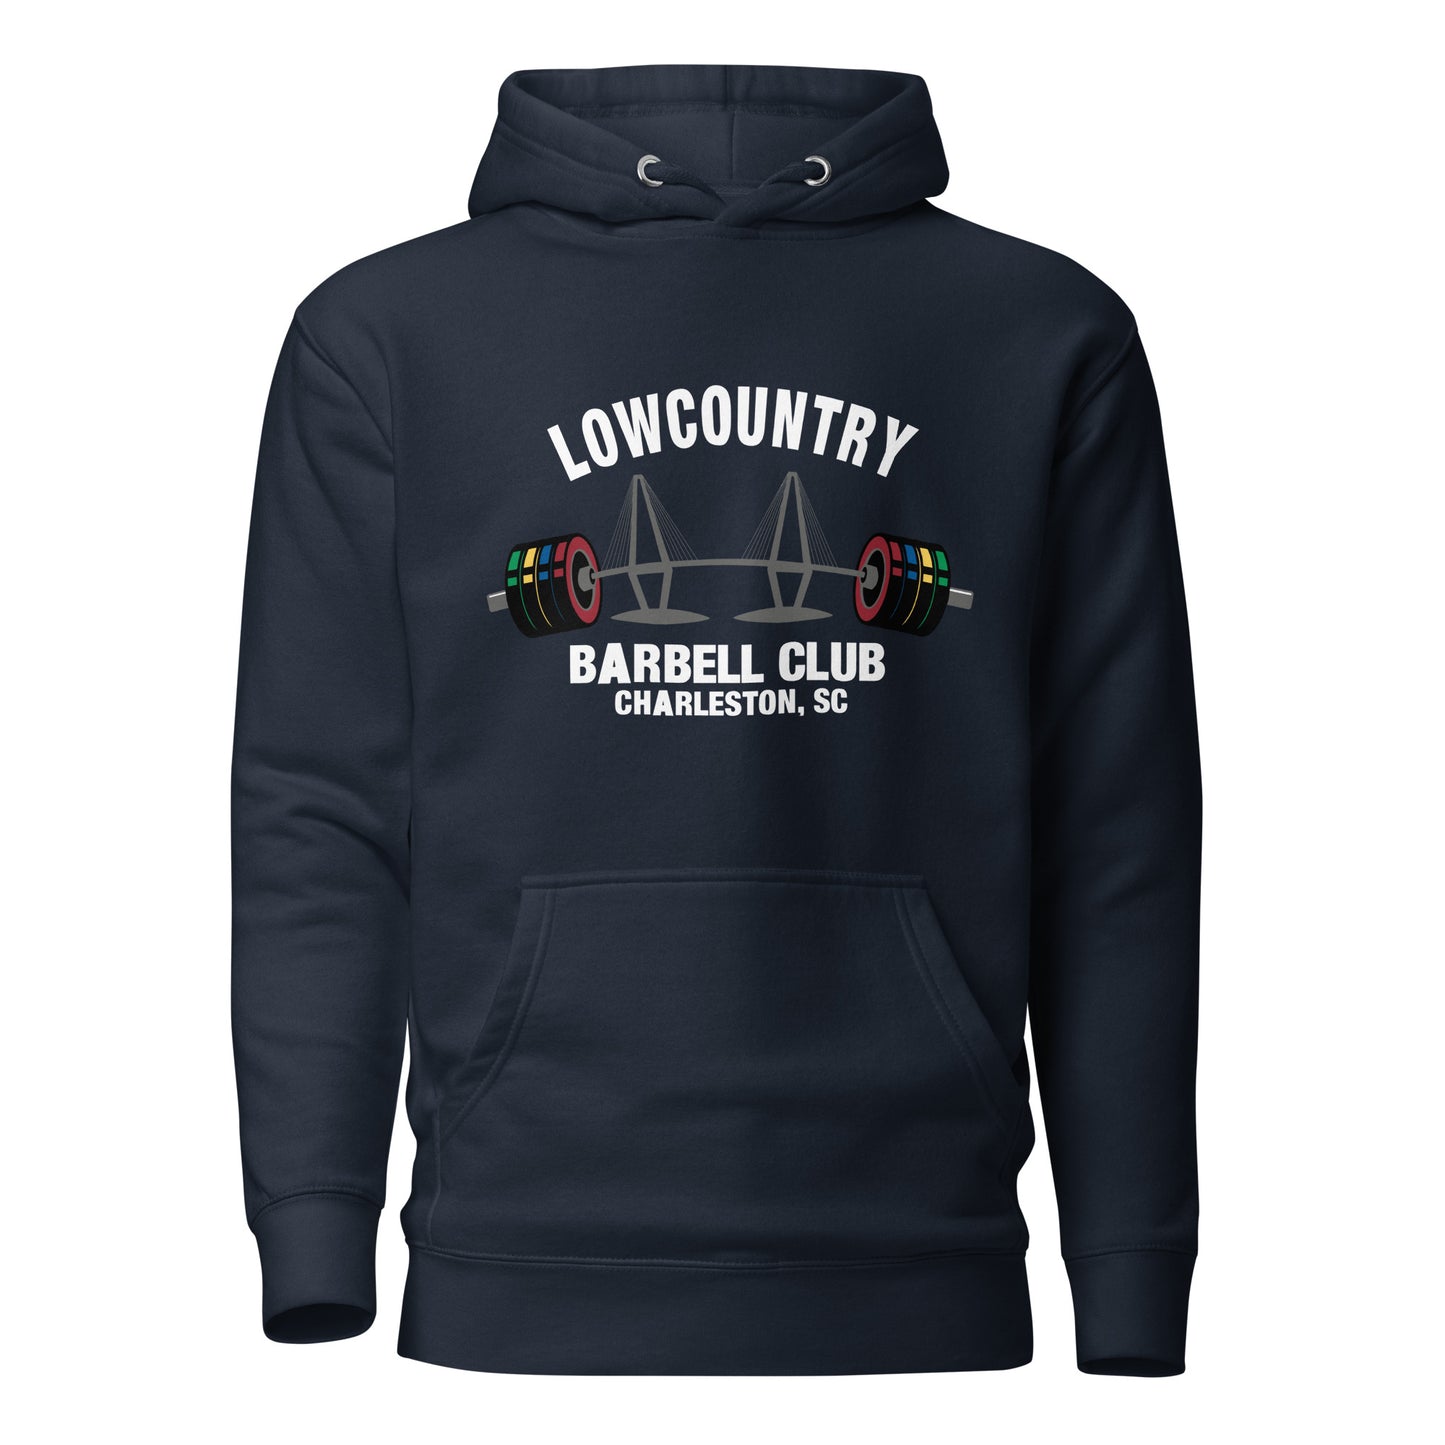 Lowcountry Barbell Club Iconic Hoodie